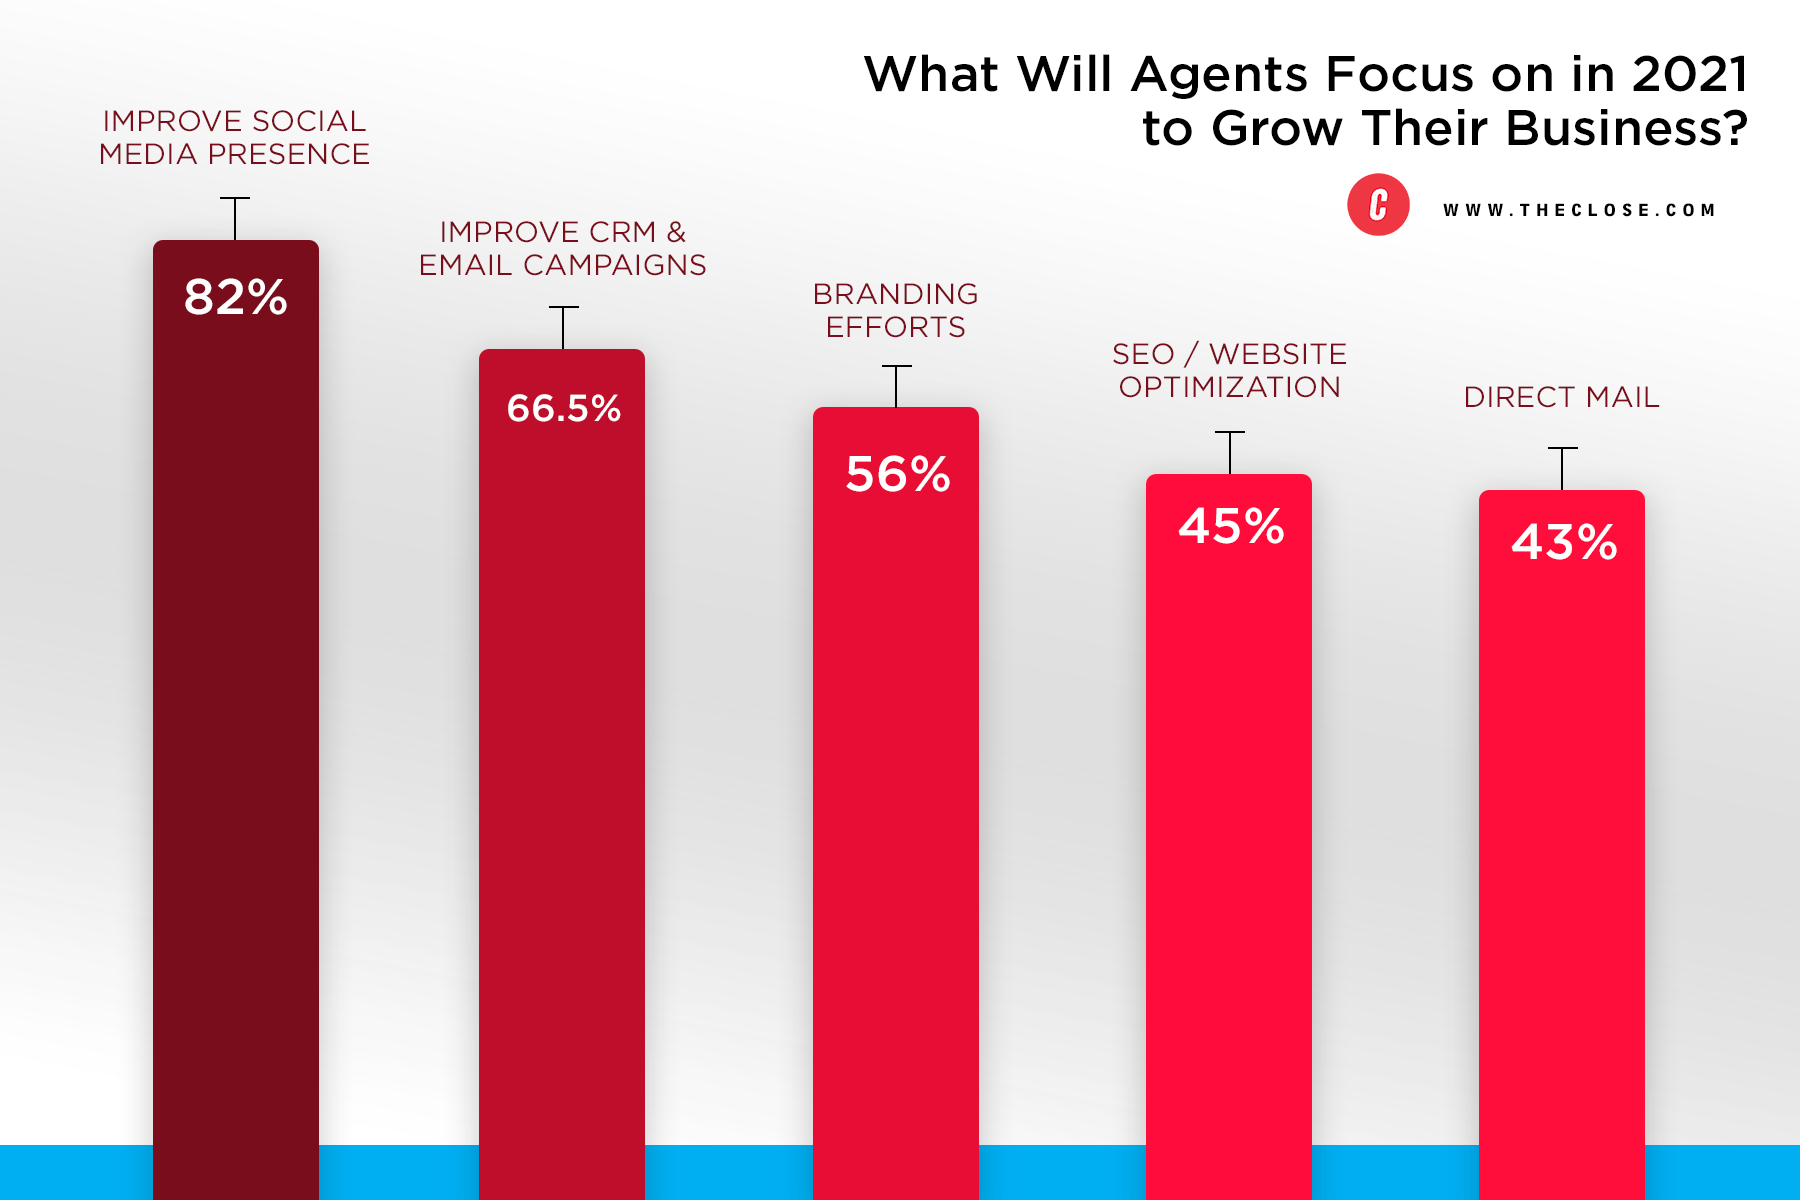 Where Agents Will Focus in 2021